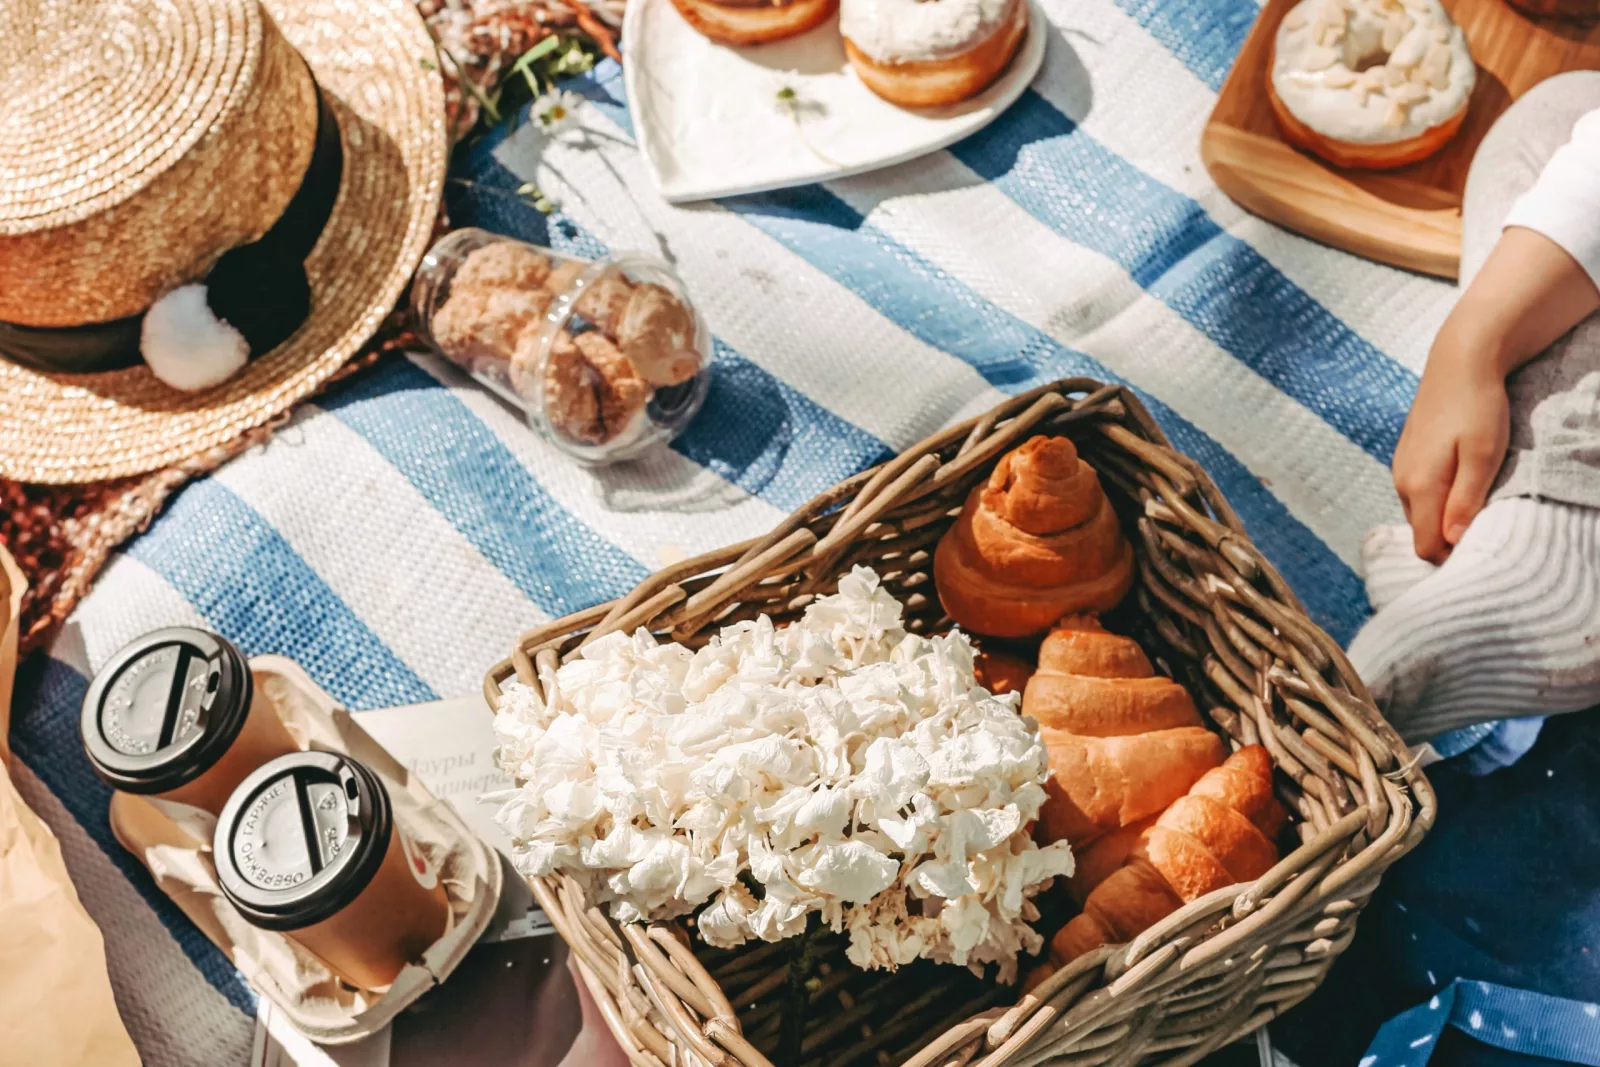 Best picnic spots on the Gold Coast